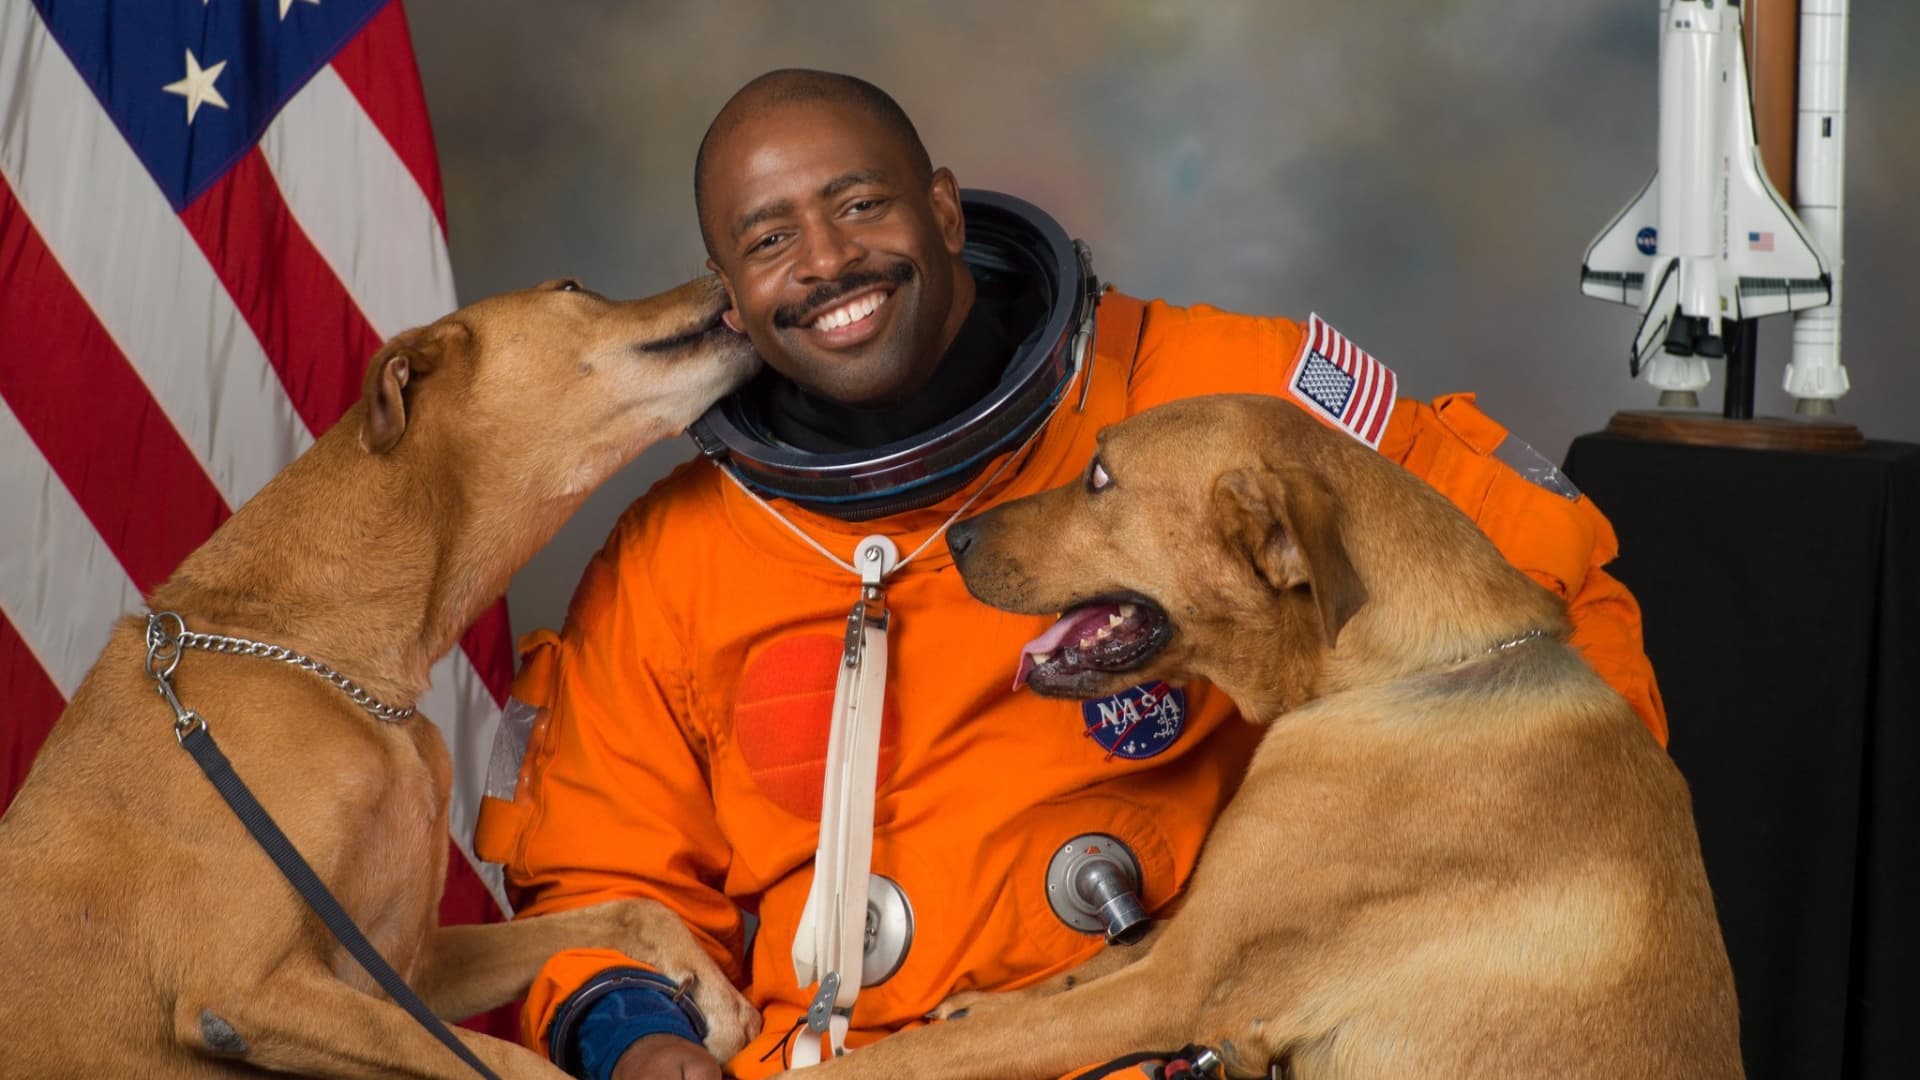 NASA astronaut Leland Melvin poses with his dogs, Jake and Scout, for an official portrait that later went viral.